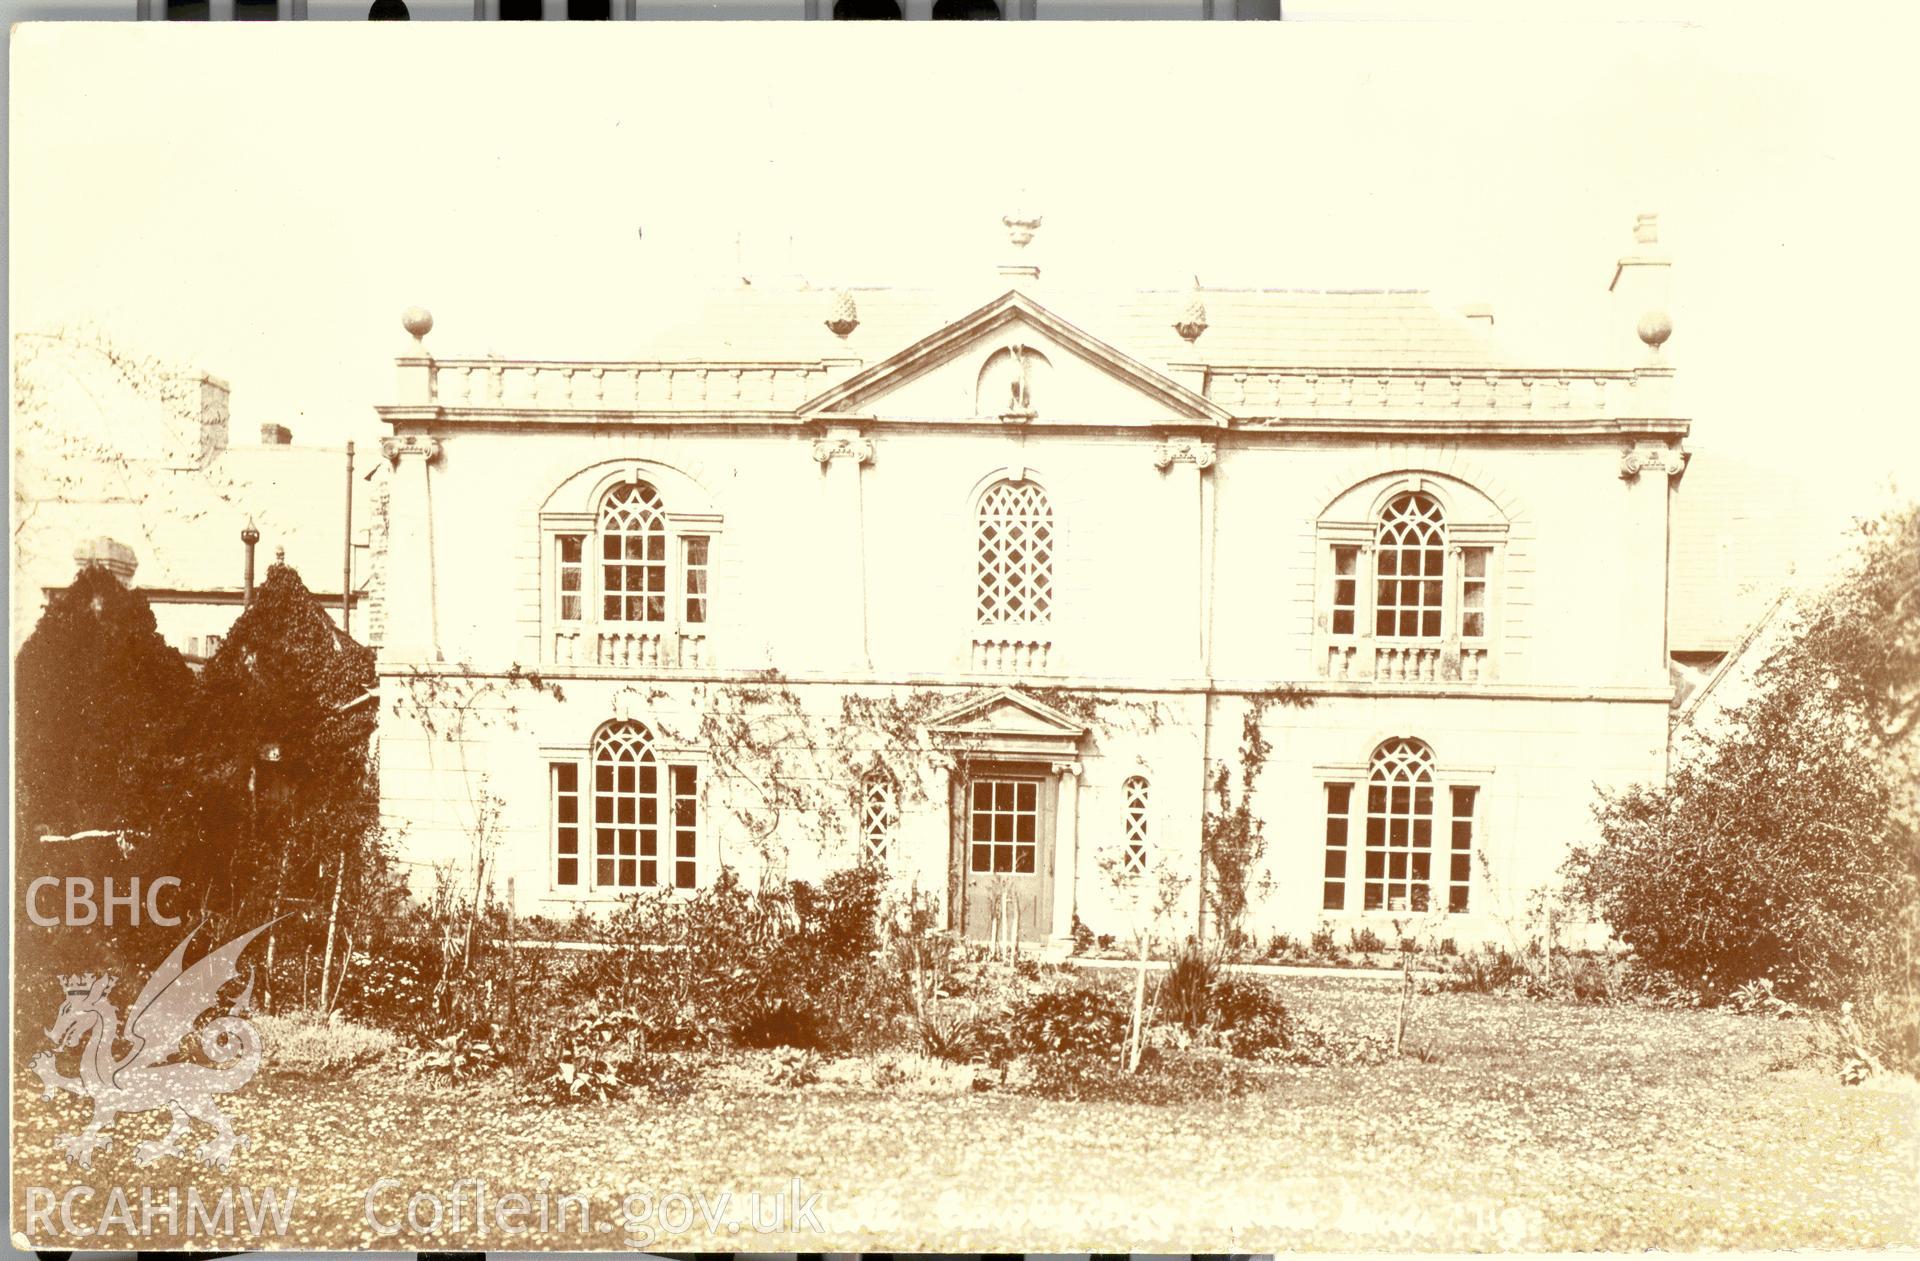 Digitised postcard image of Old Hall, Cowbridge, E. Miles, Ewenny Road Studio, Bridgend. Produced by Parks and Gardens Data Services, from an original item in the Peter Davis Collection at Parks and Gardens UK. We hold only web-resolution images of this collection, suitable for viewing on screen and for research purposes only. We do not hold the original images, or publication quality scans.